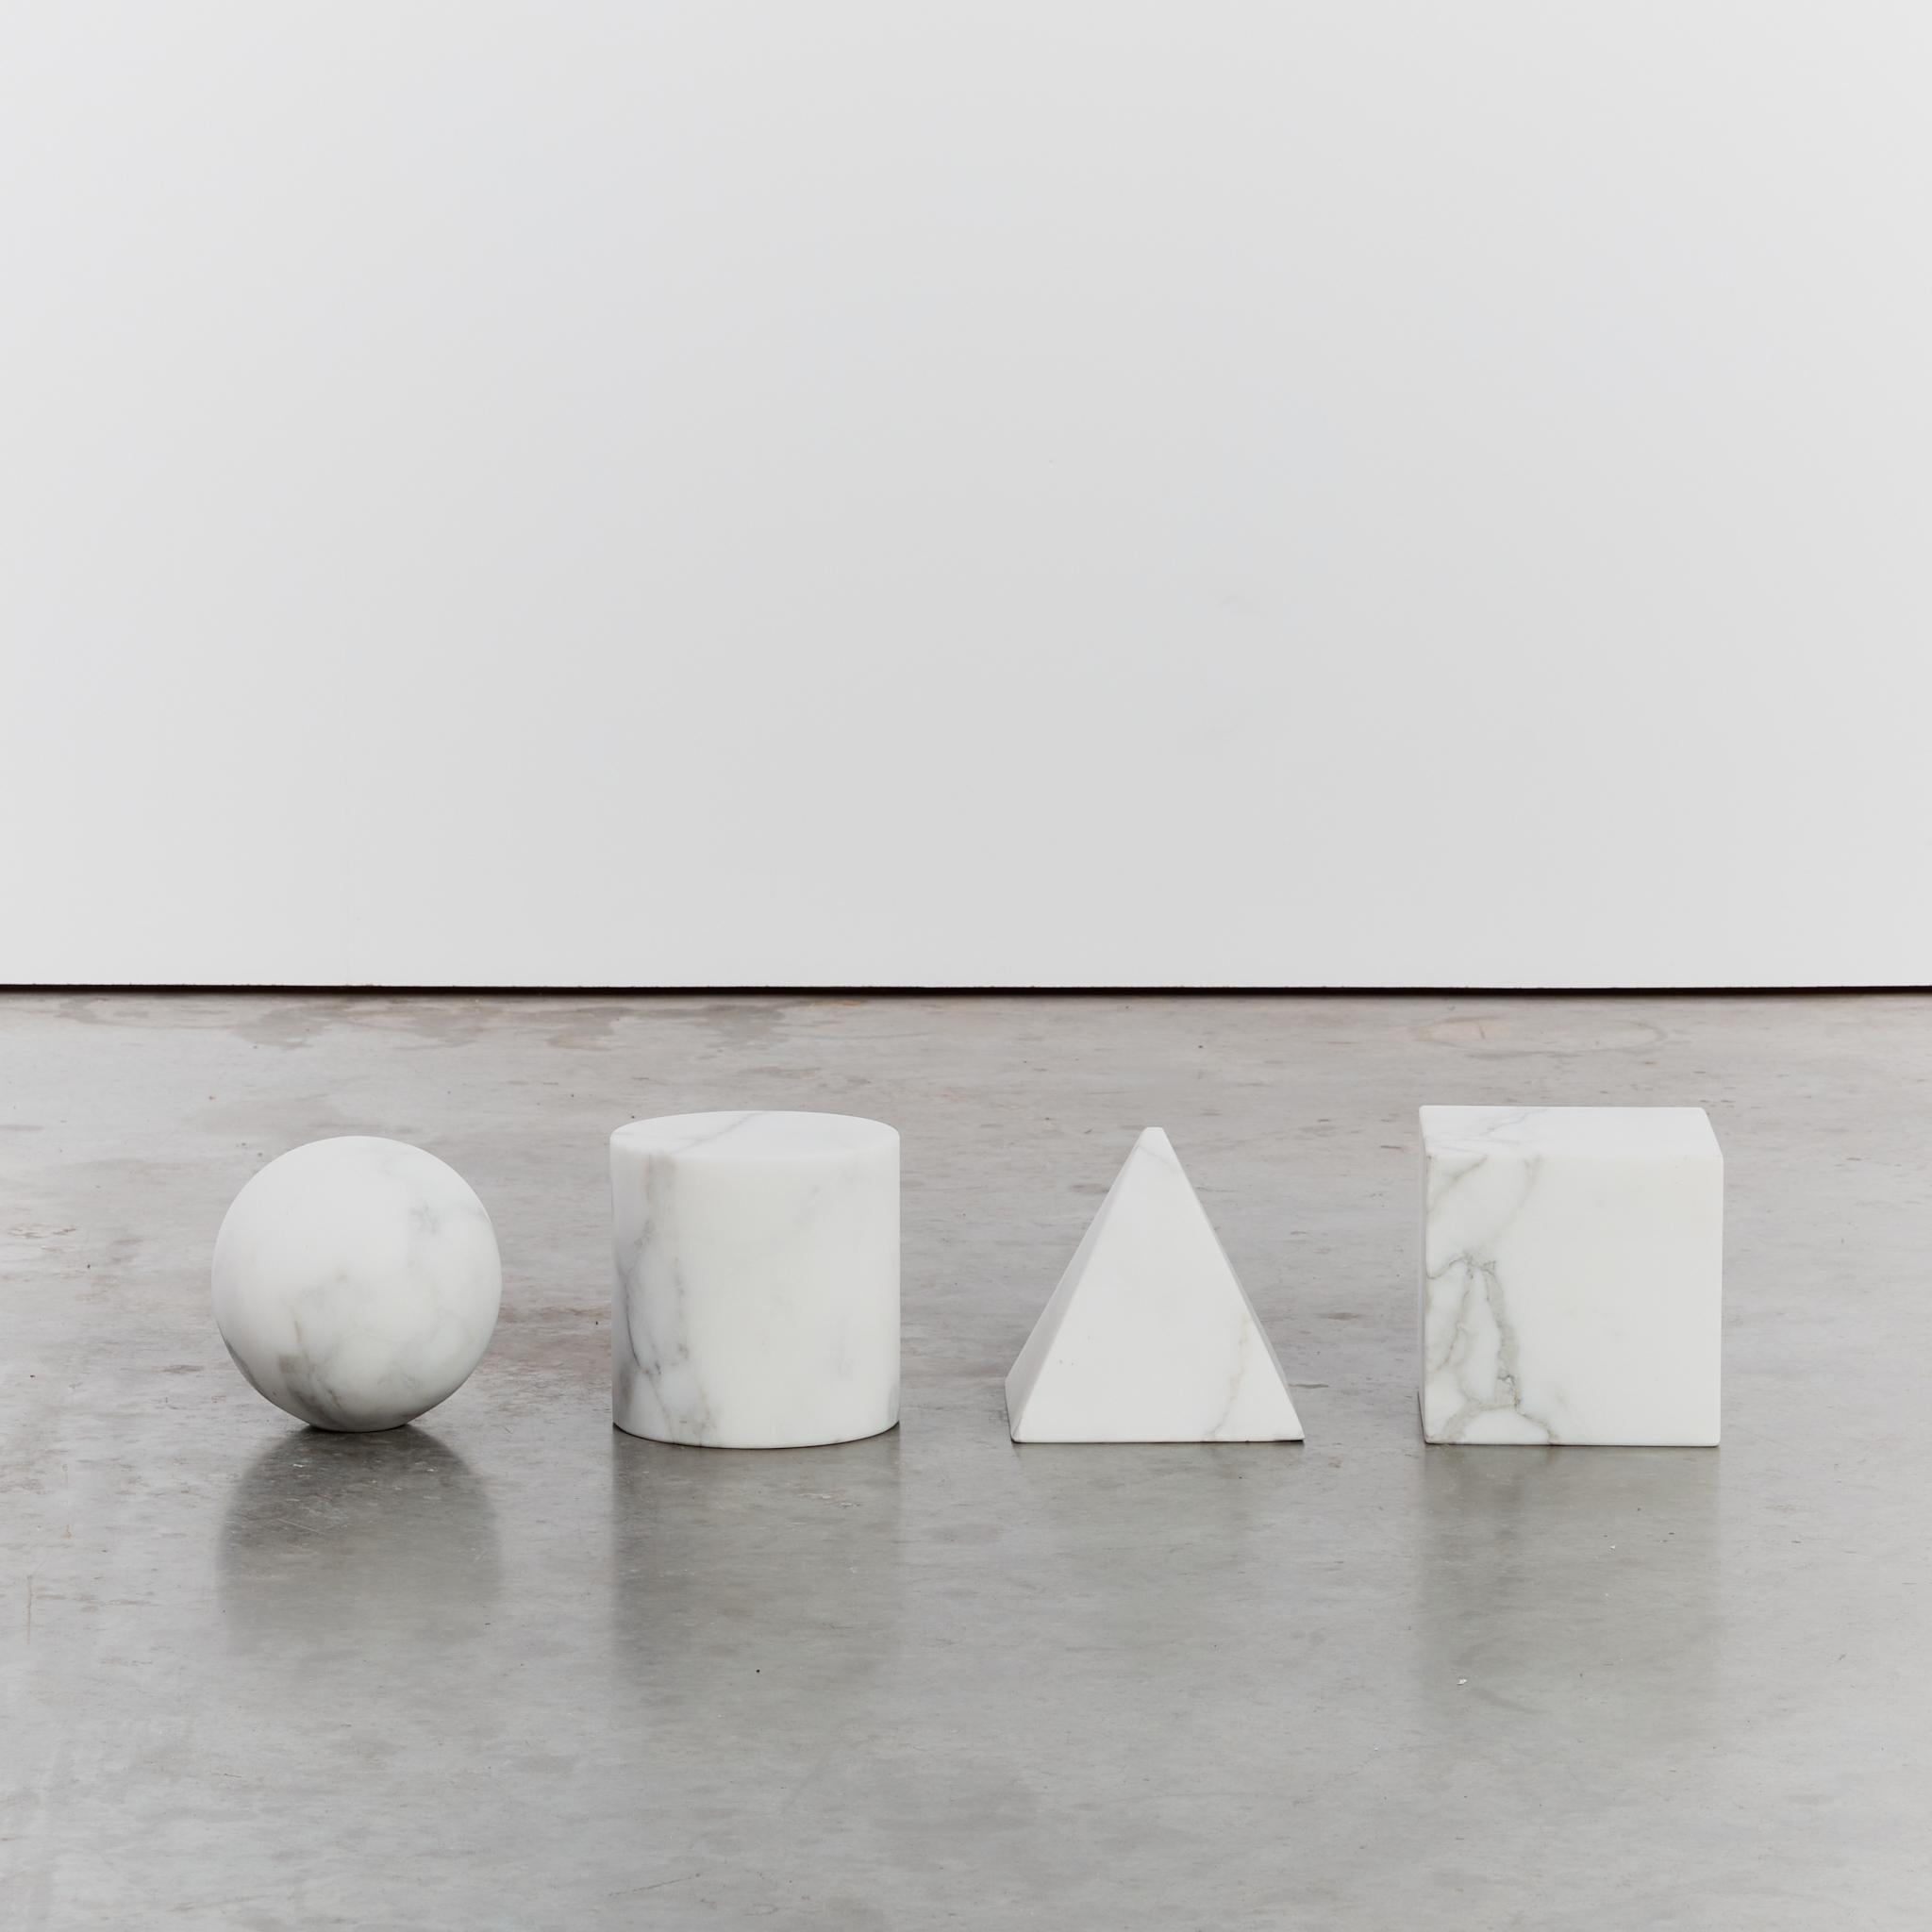 'Metafora' table by Lella and Massimo Vignelli in white marble.

Made in Italy in the late 1970s and inspired by the four forms of Euclidean geometry: the cube, the pyramid, the cylinder and the sphere. These forms are made out of black marble and